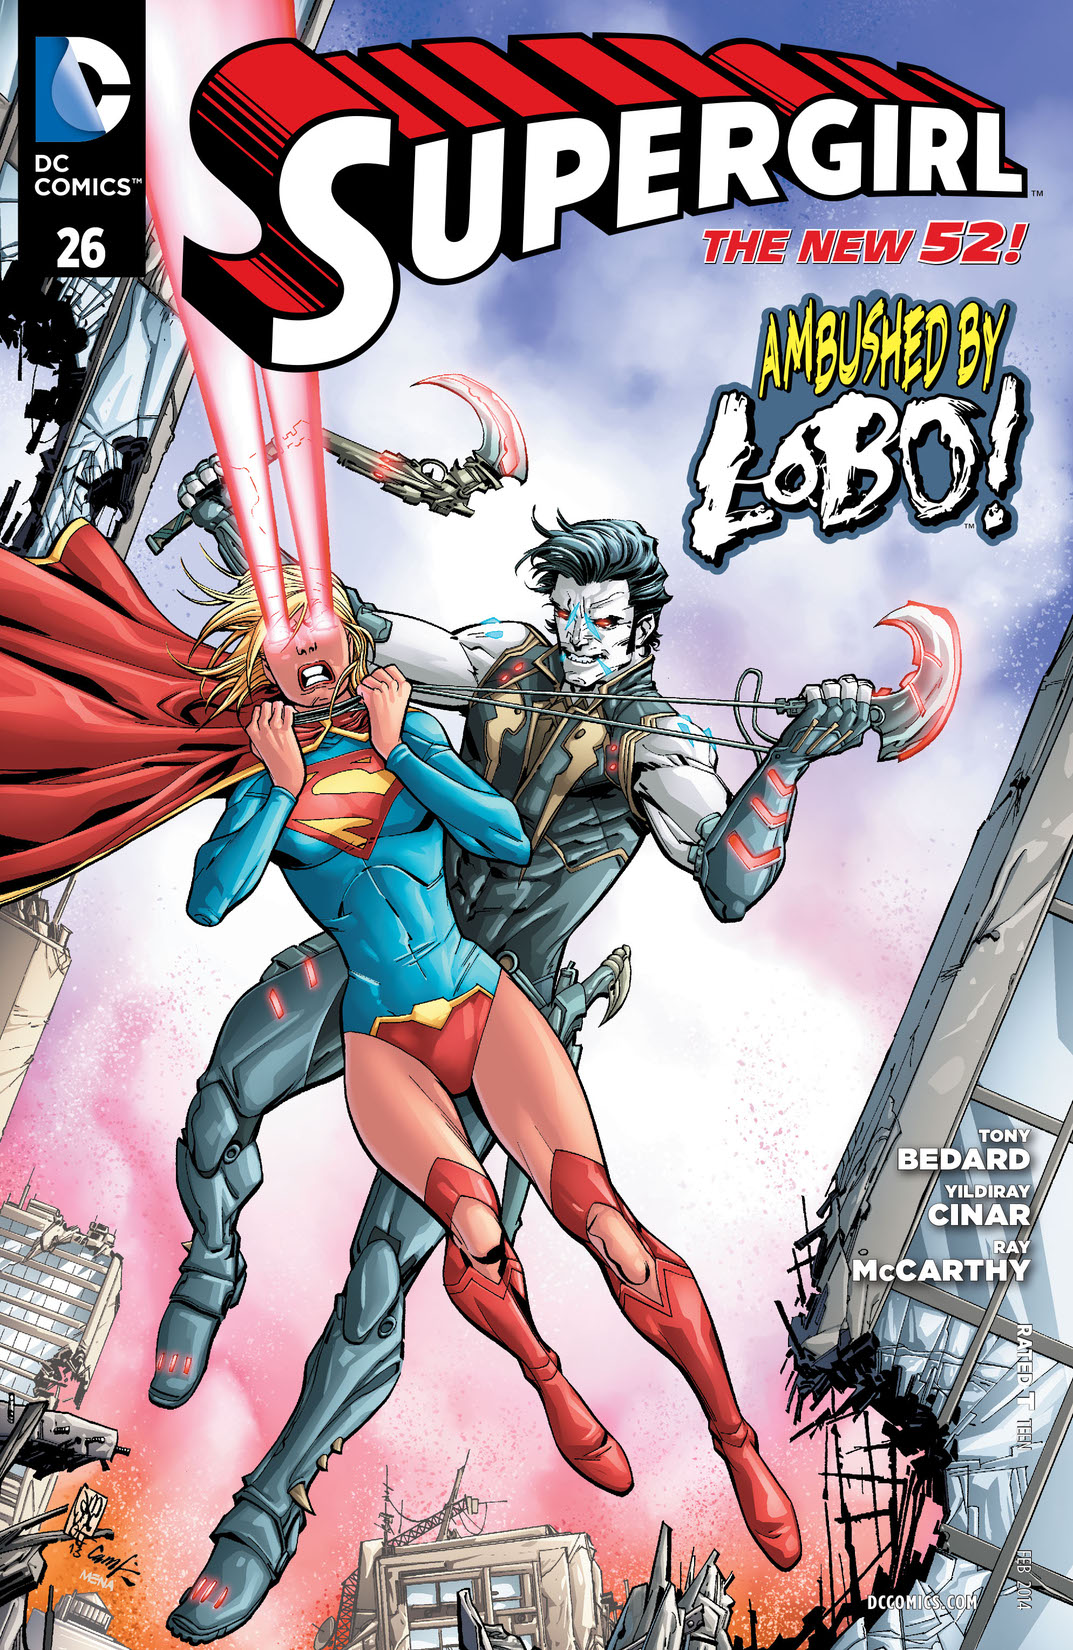 Supergirl (2011-) #26 preview images